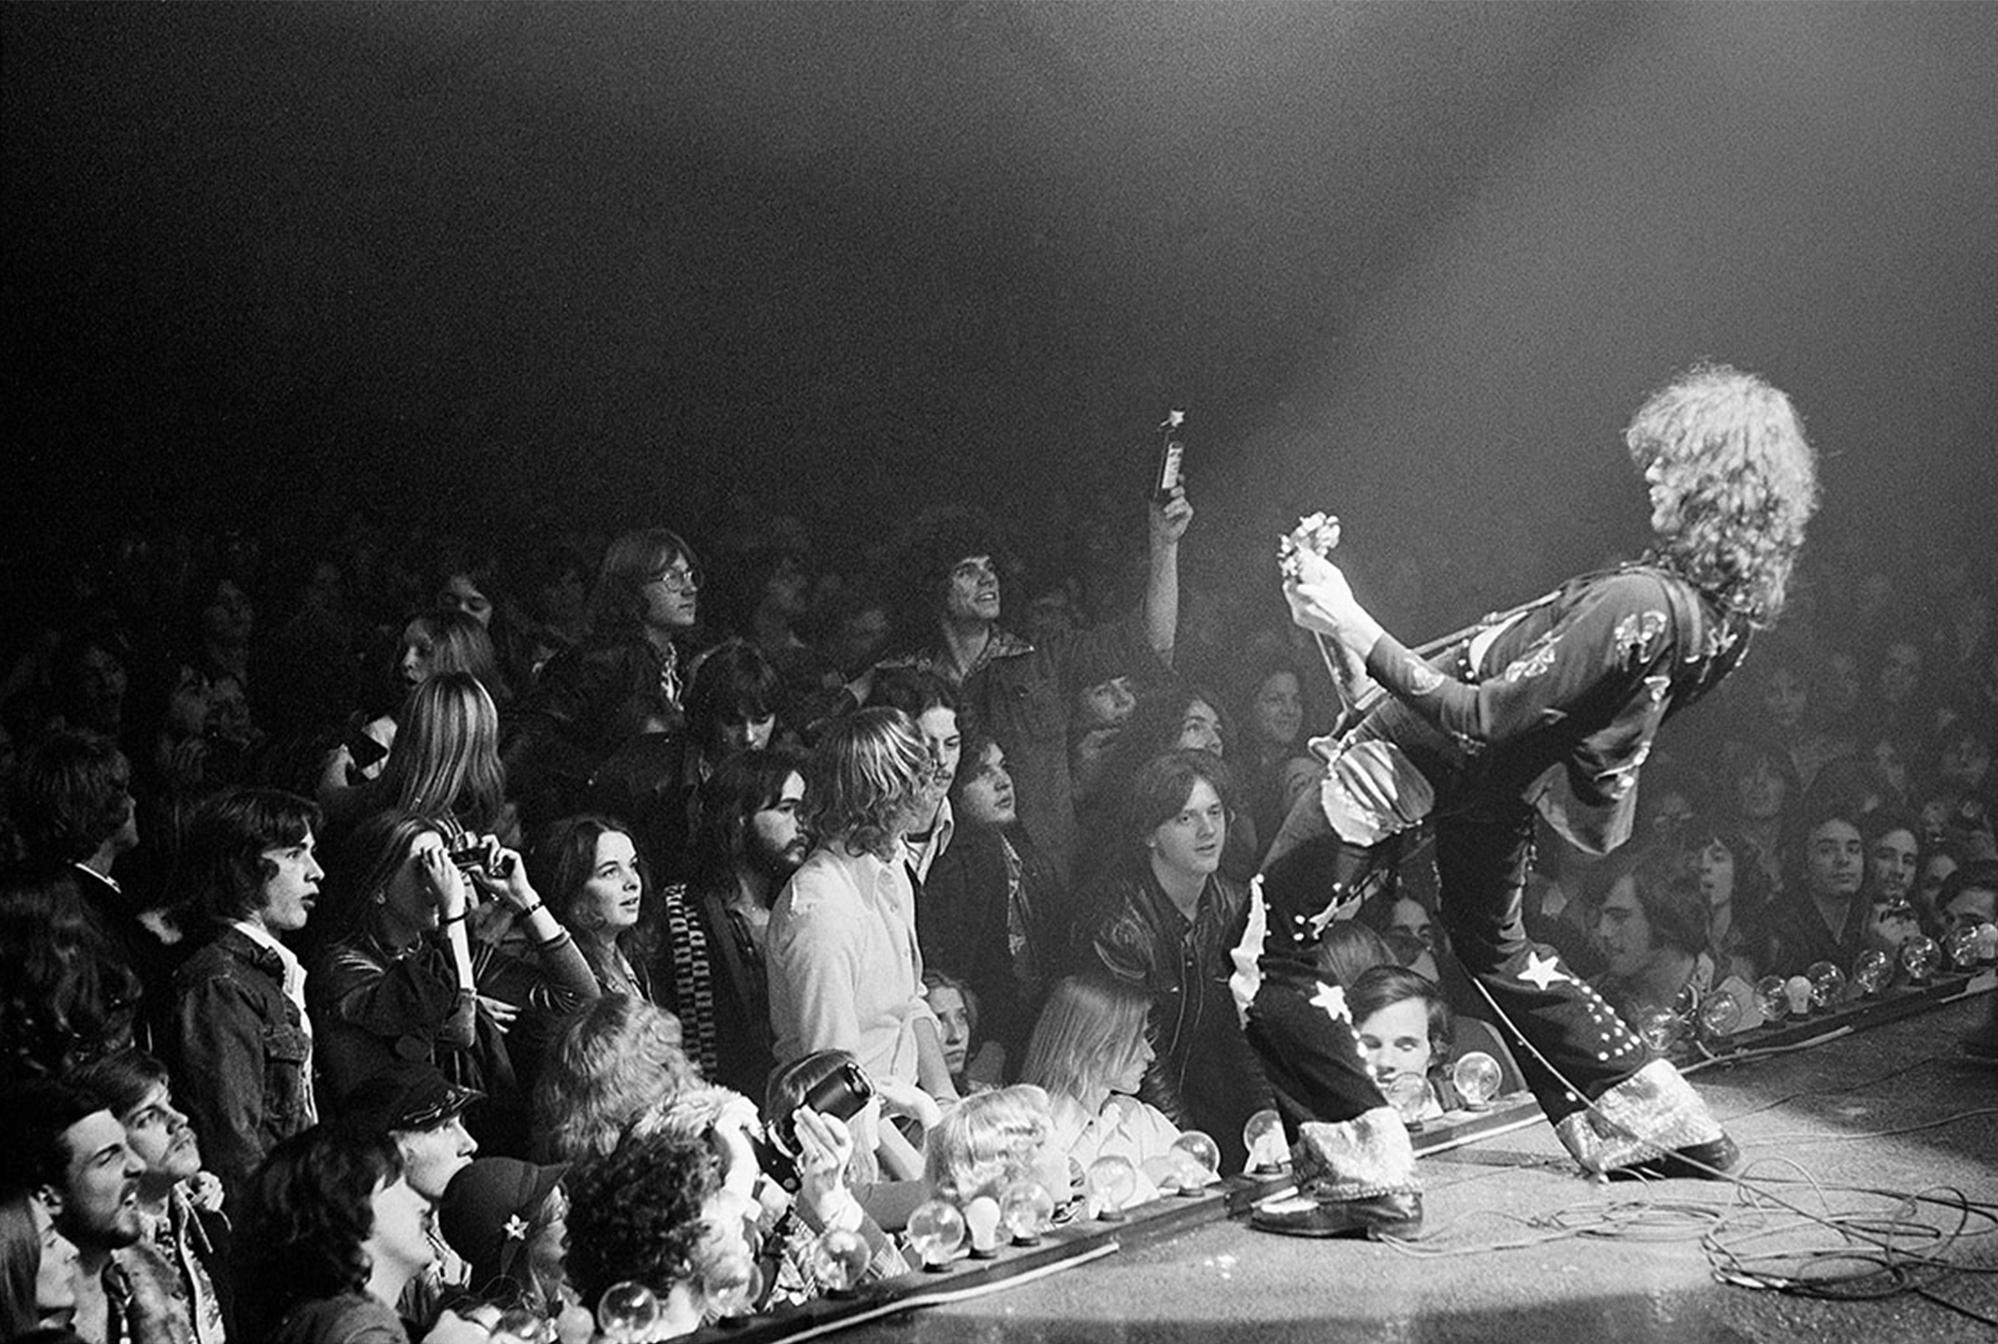 Jimmy Page Led Zeppelin live on stage 1975